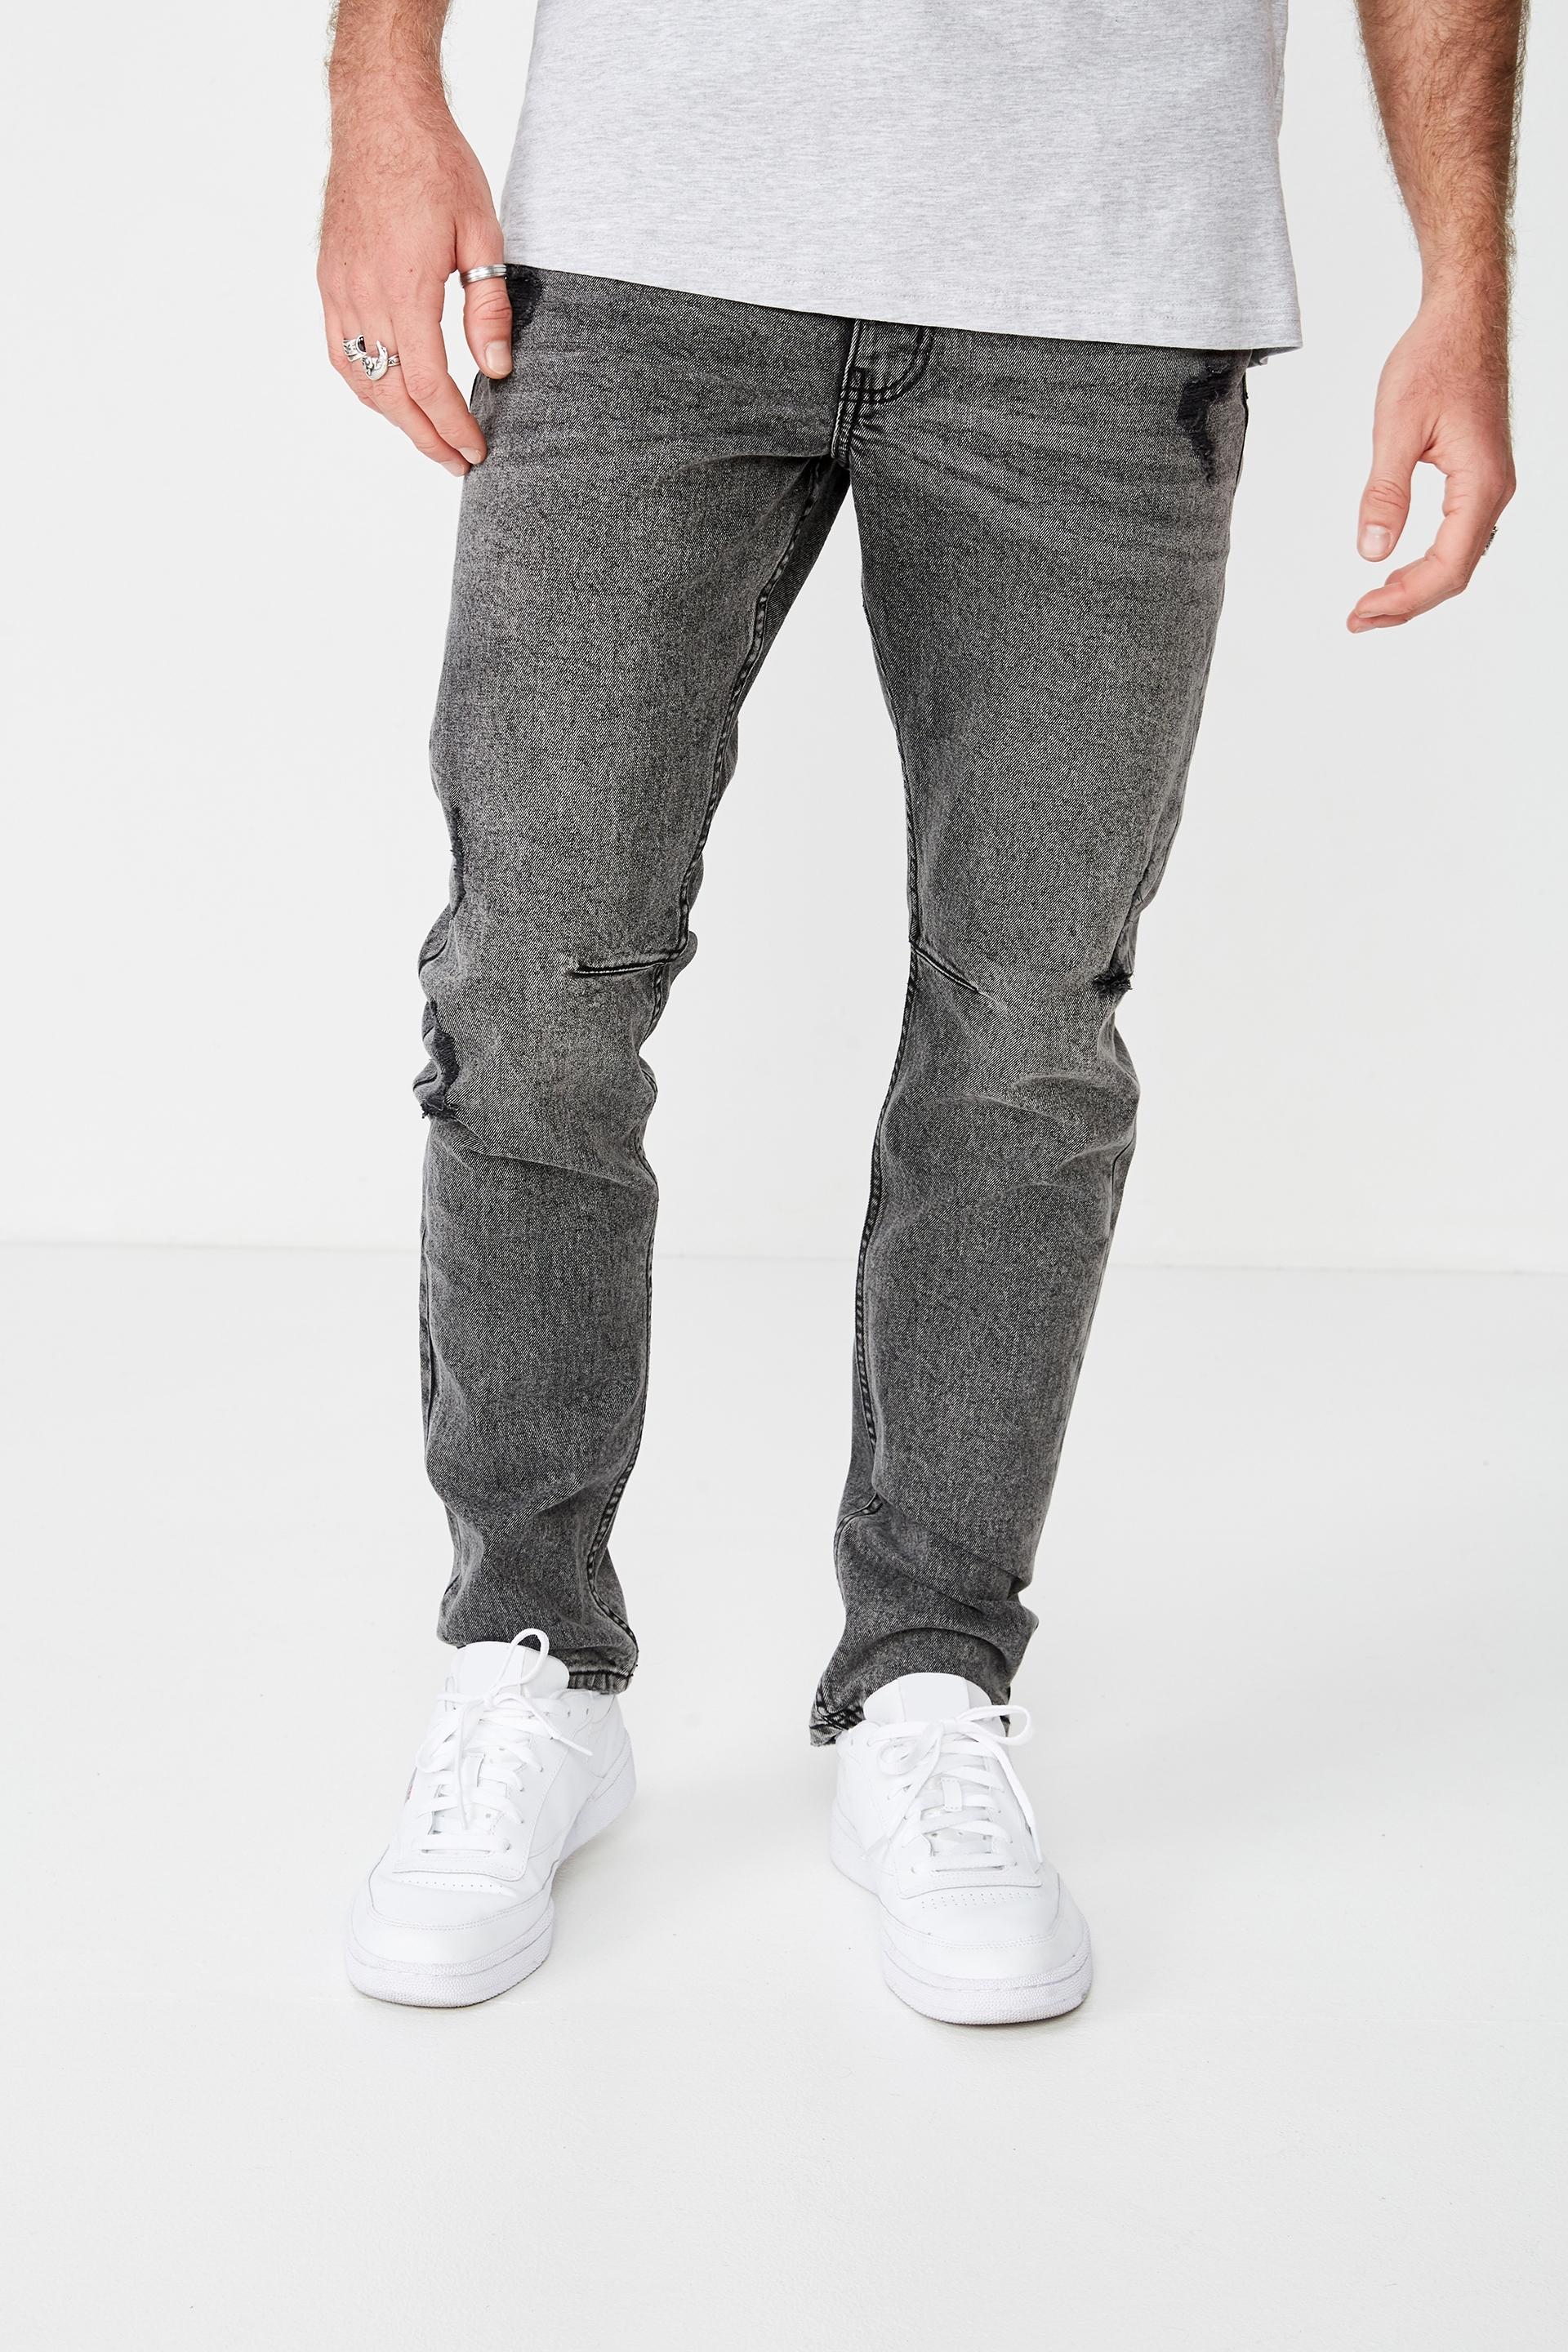 Tapered leg jeans - element grey Cotton On Jeans | Superbalist.com